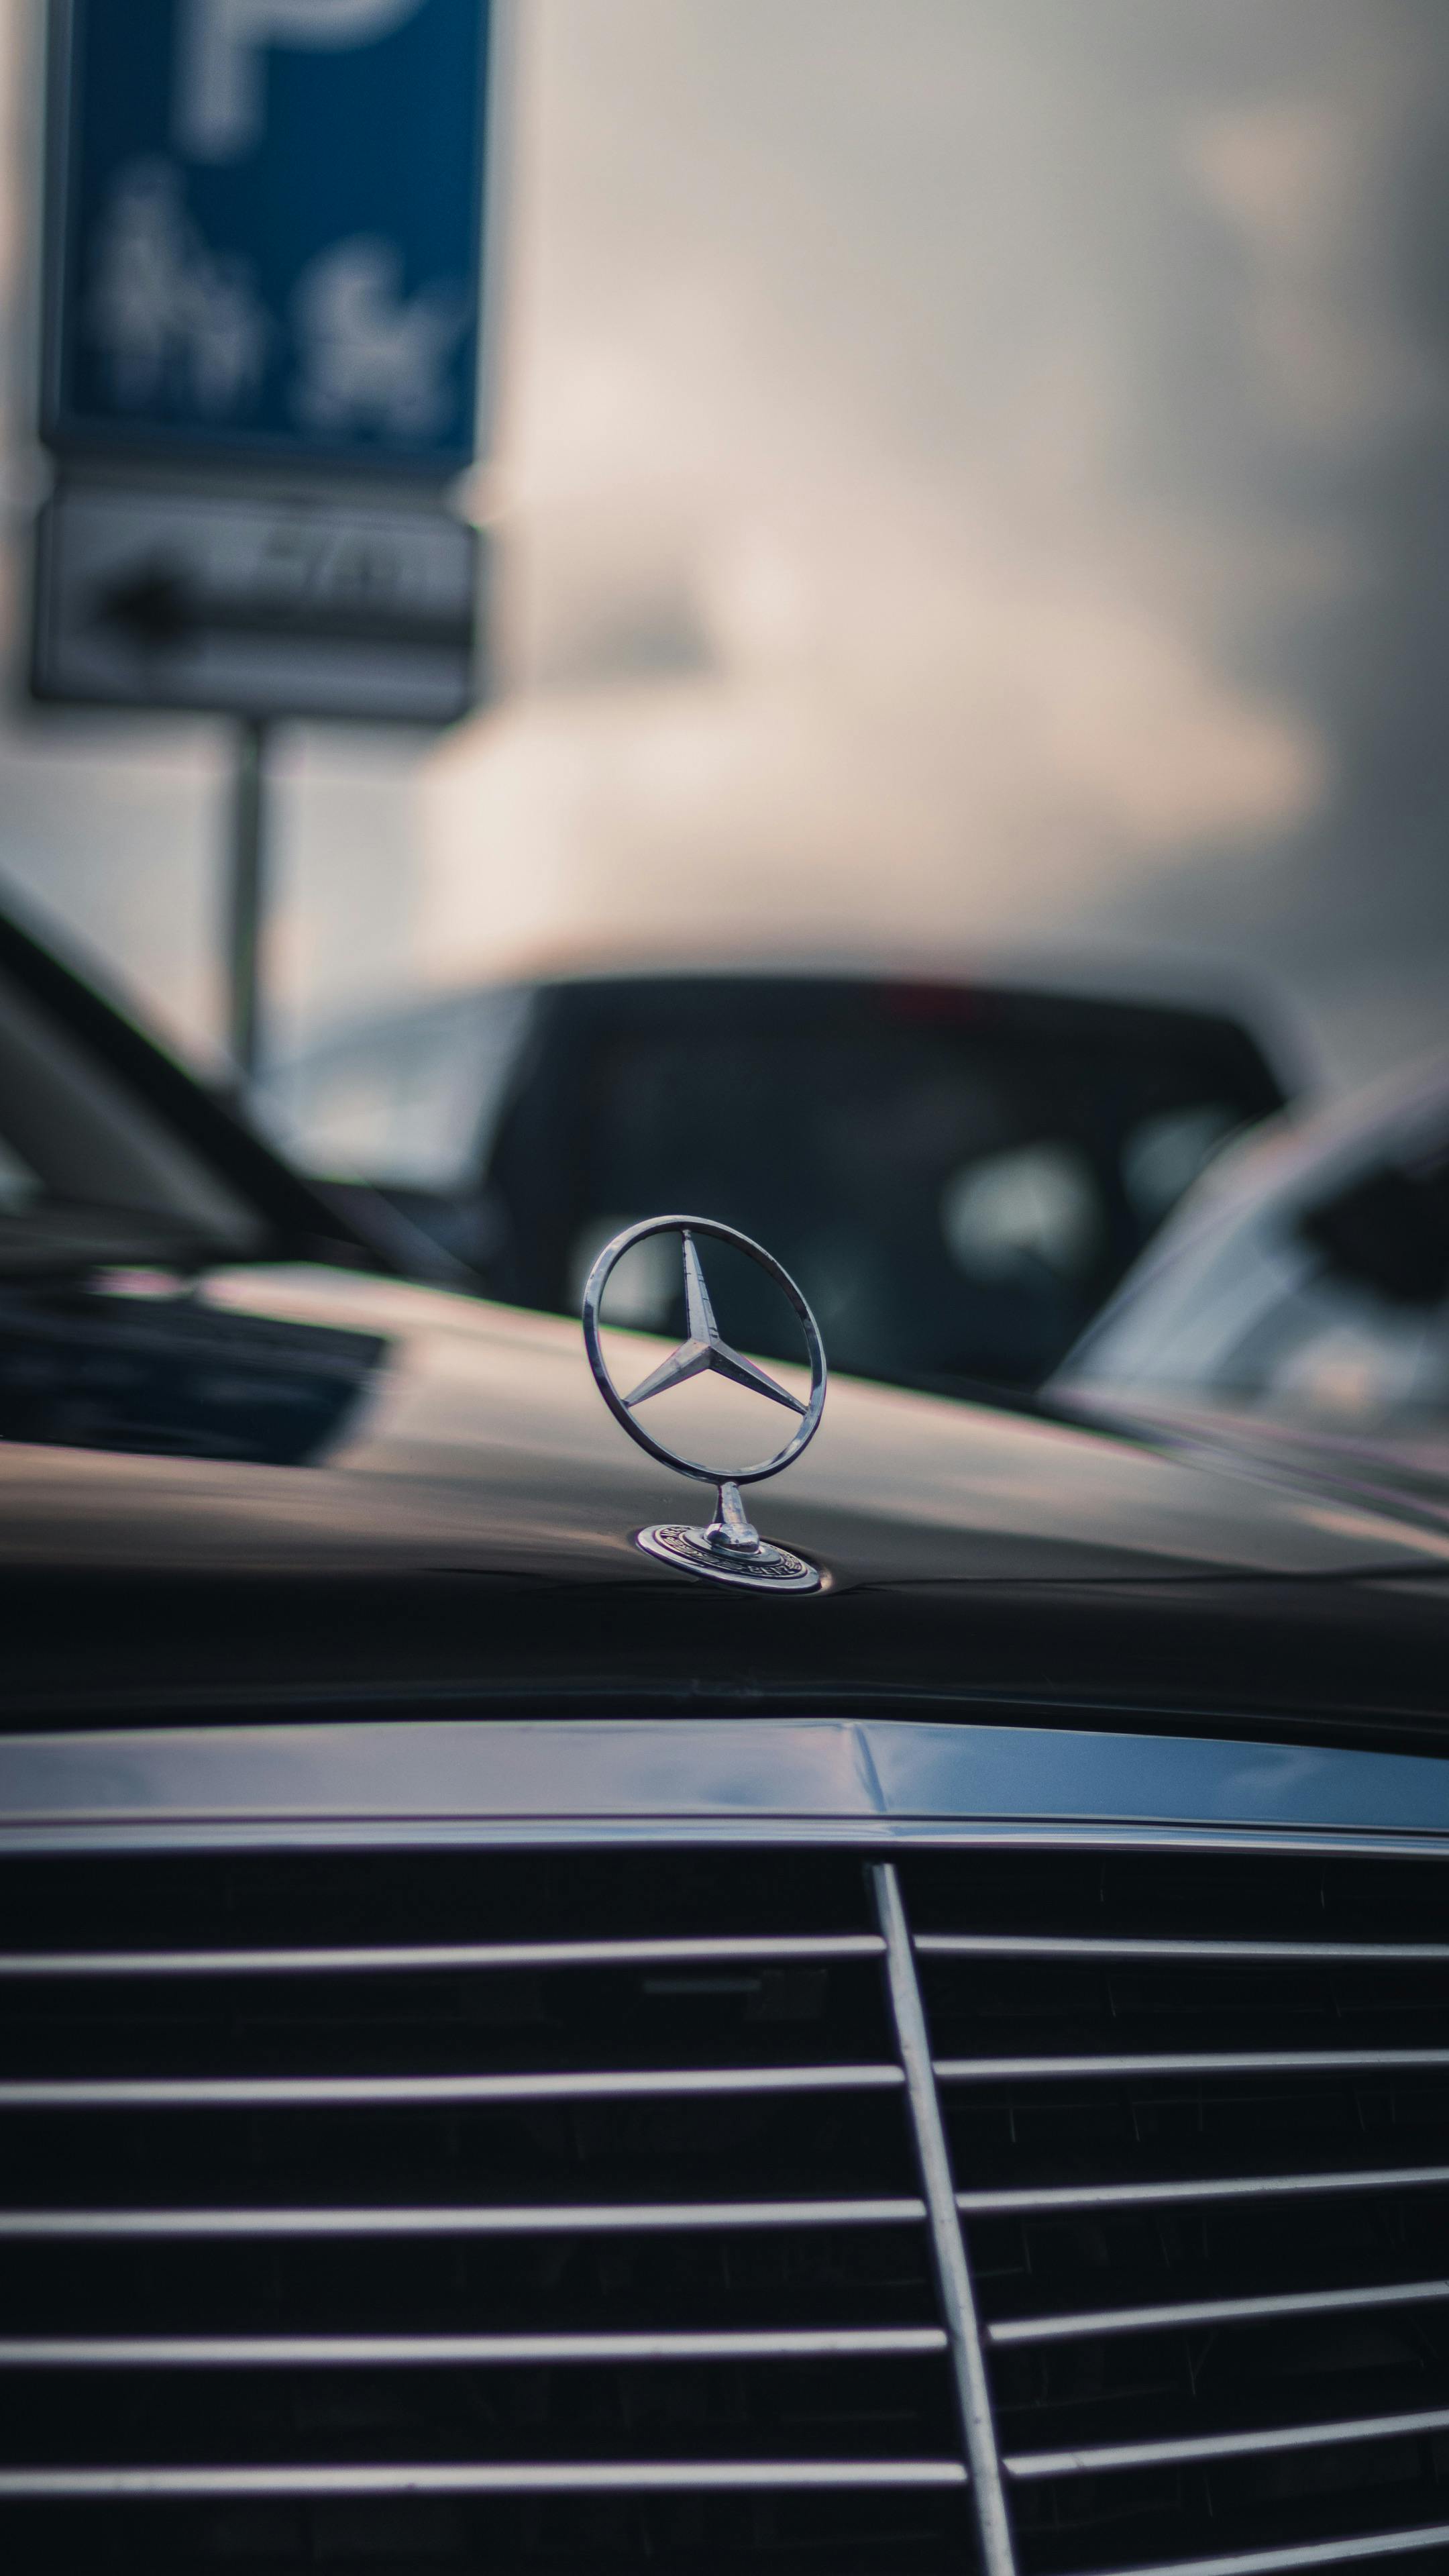 Mercedes Benz S Class Wallpapers cho Android - Tải về